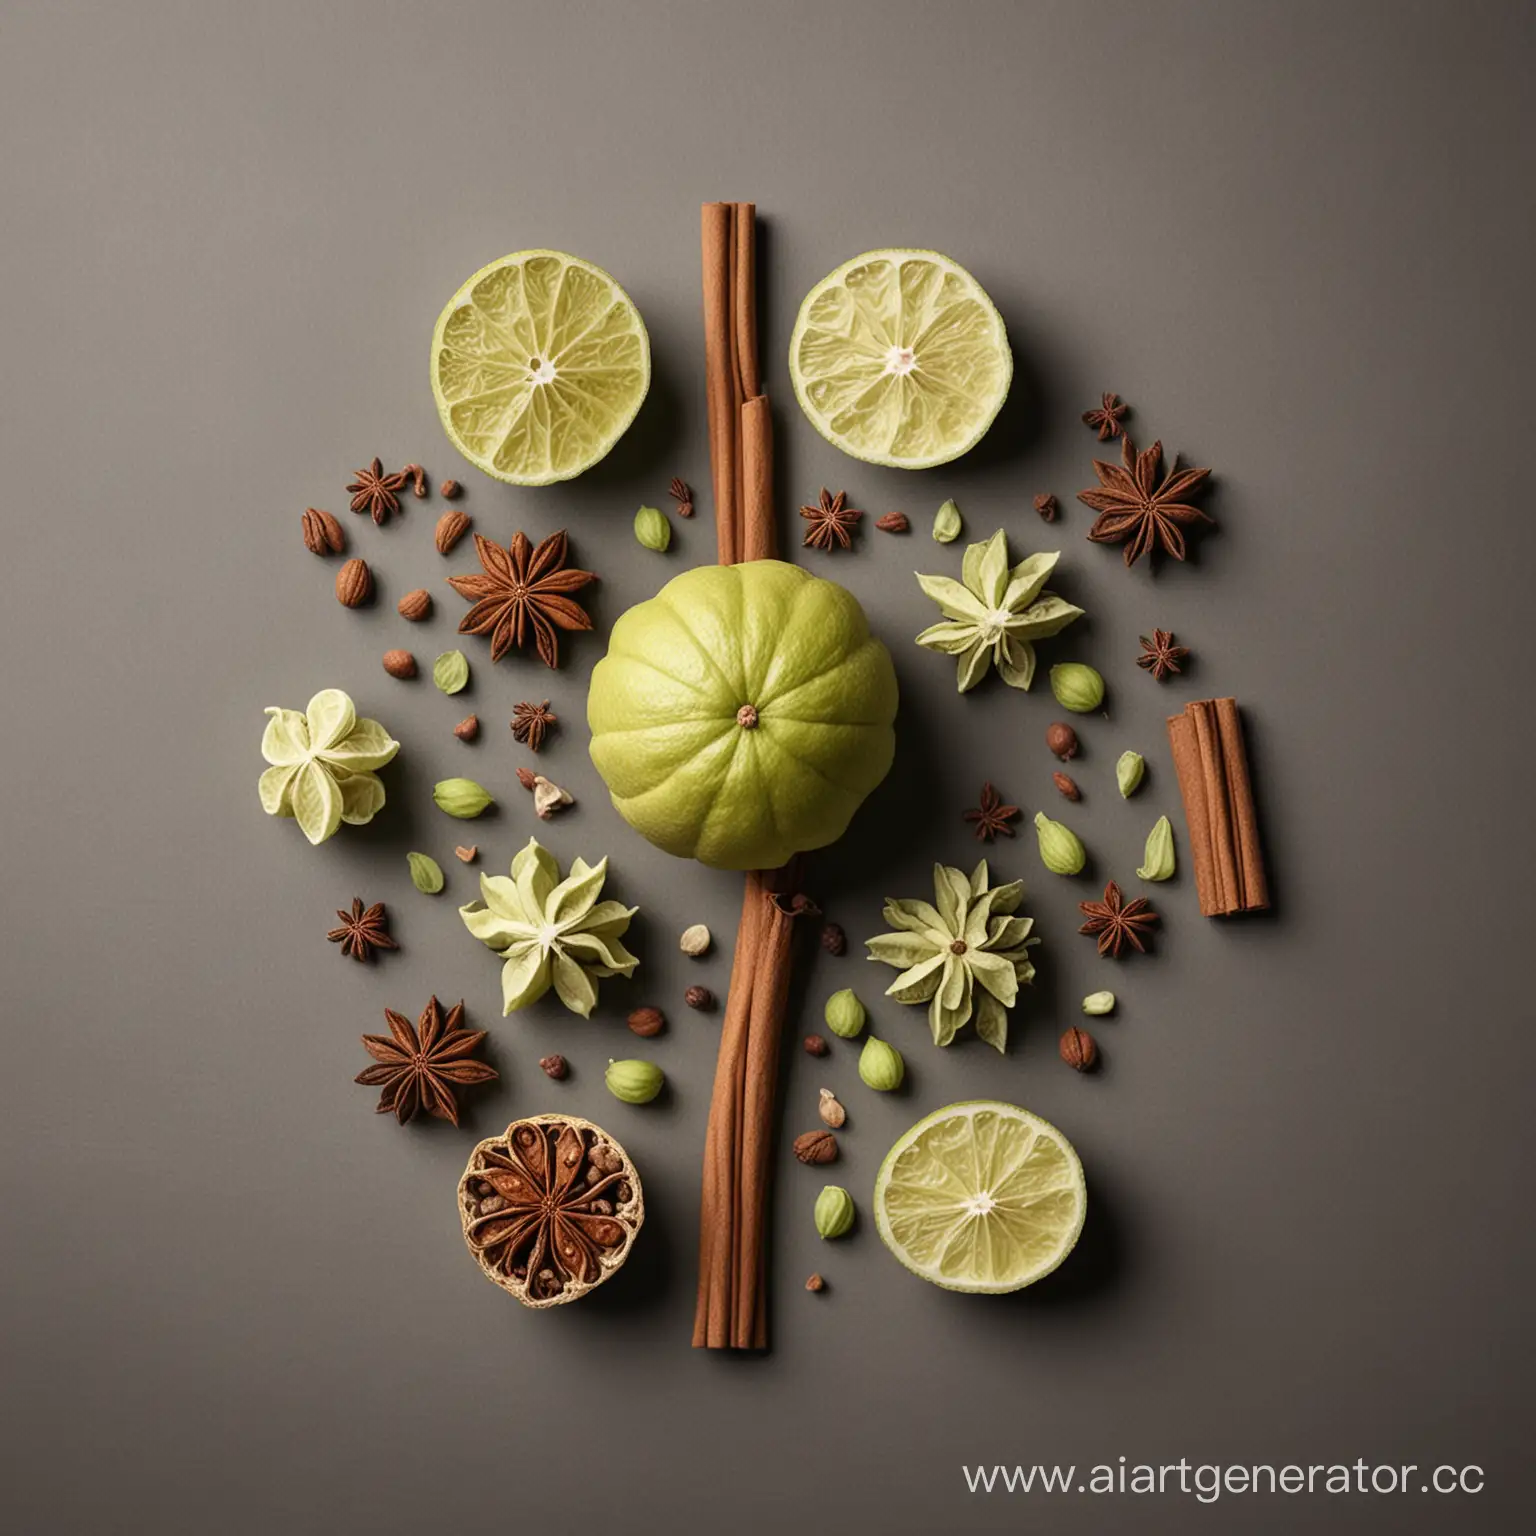 Aromatic-Spices-Arranged-in-Symmetrical-Harmony-on-Monochrome-Background